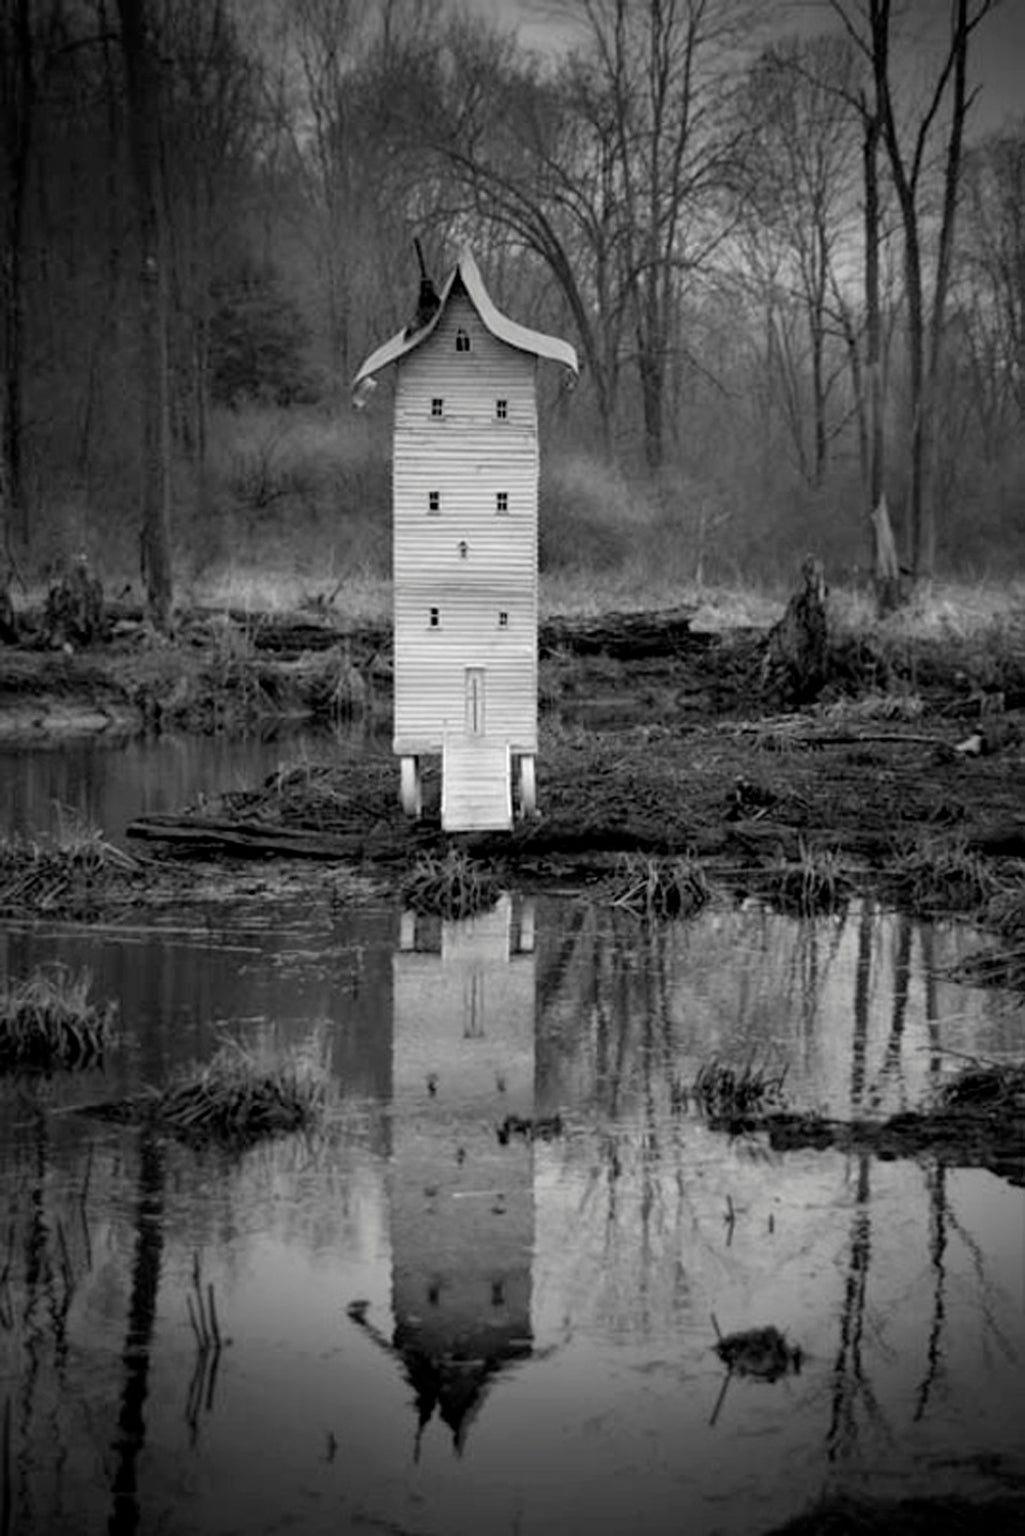 Robert Hite Landscape Photograph - Prayer House (from Robert hite's "Imagined Histories" collection)